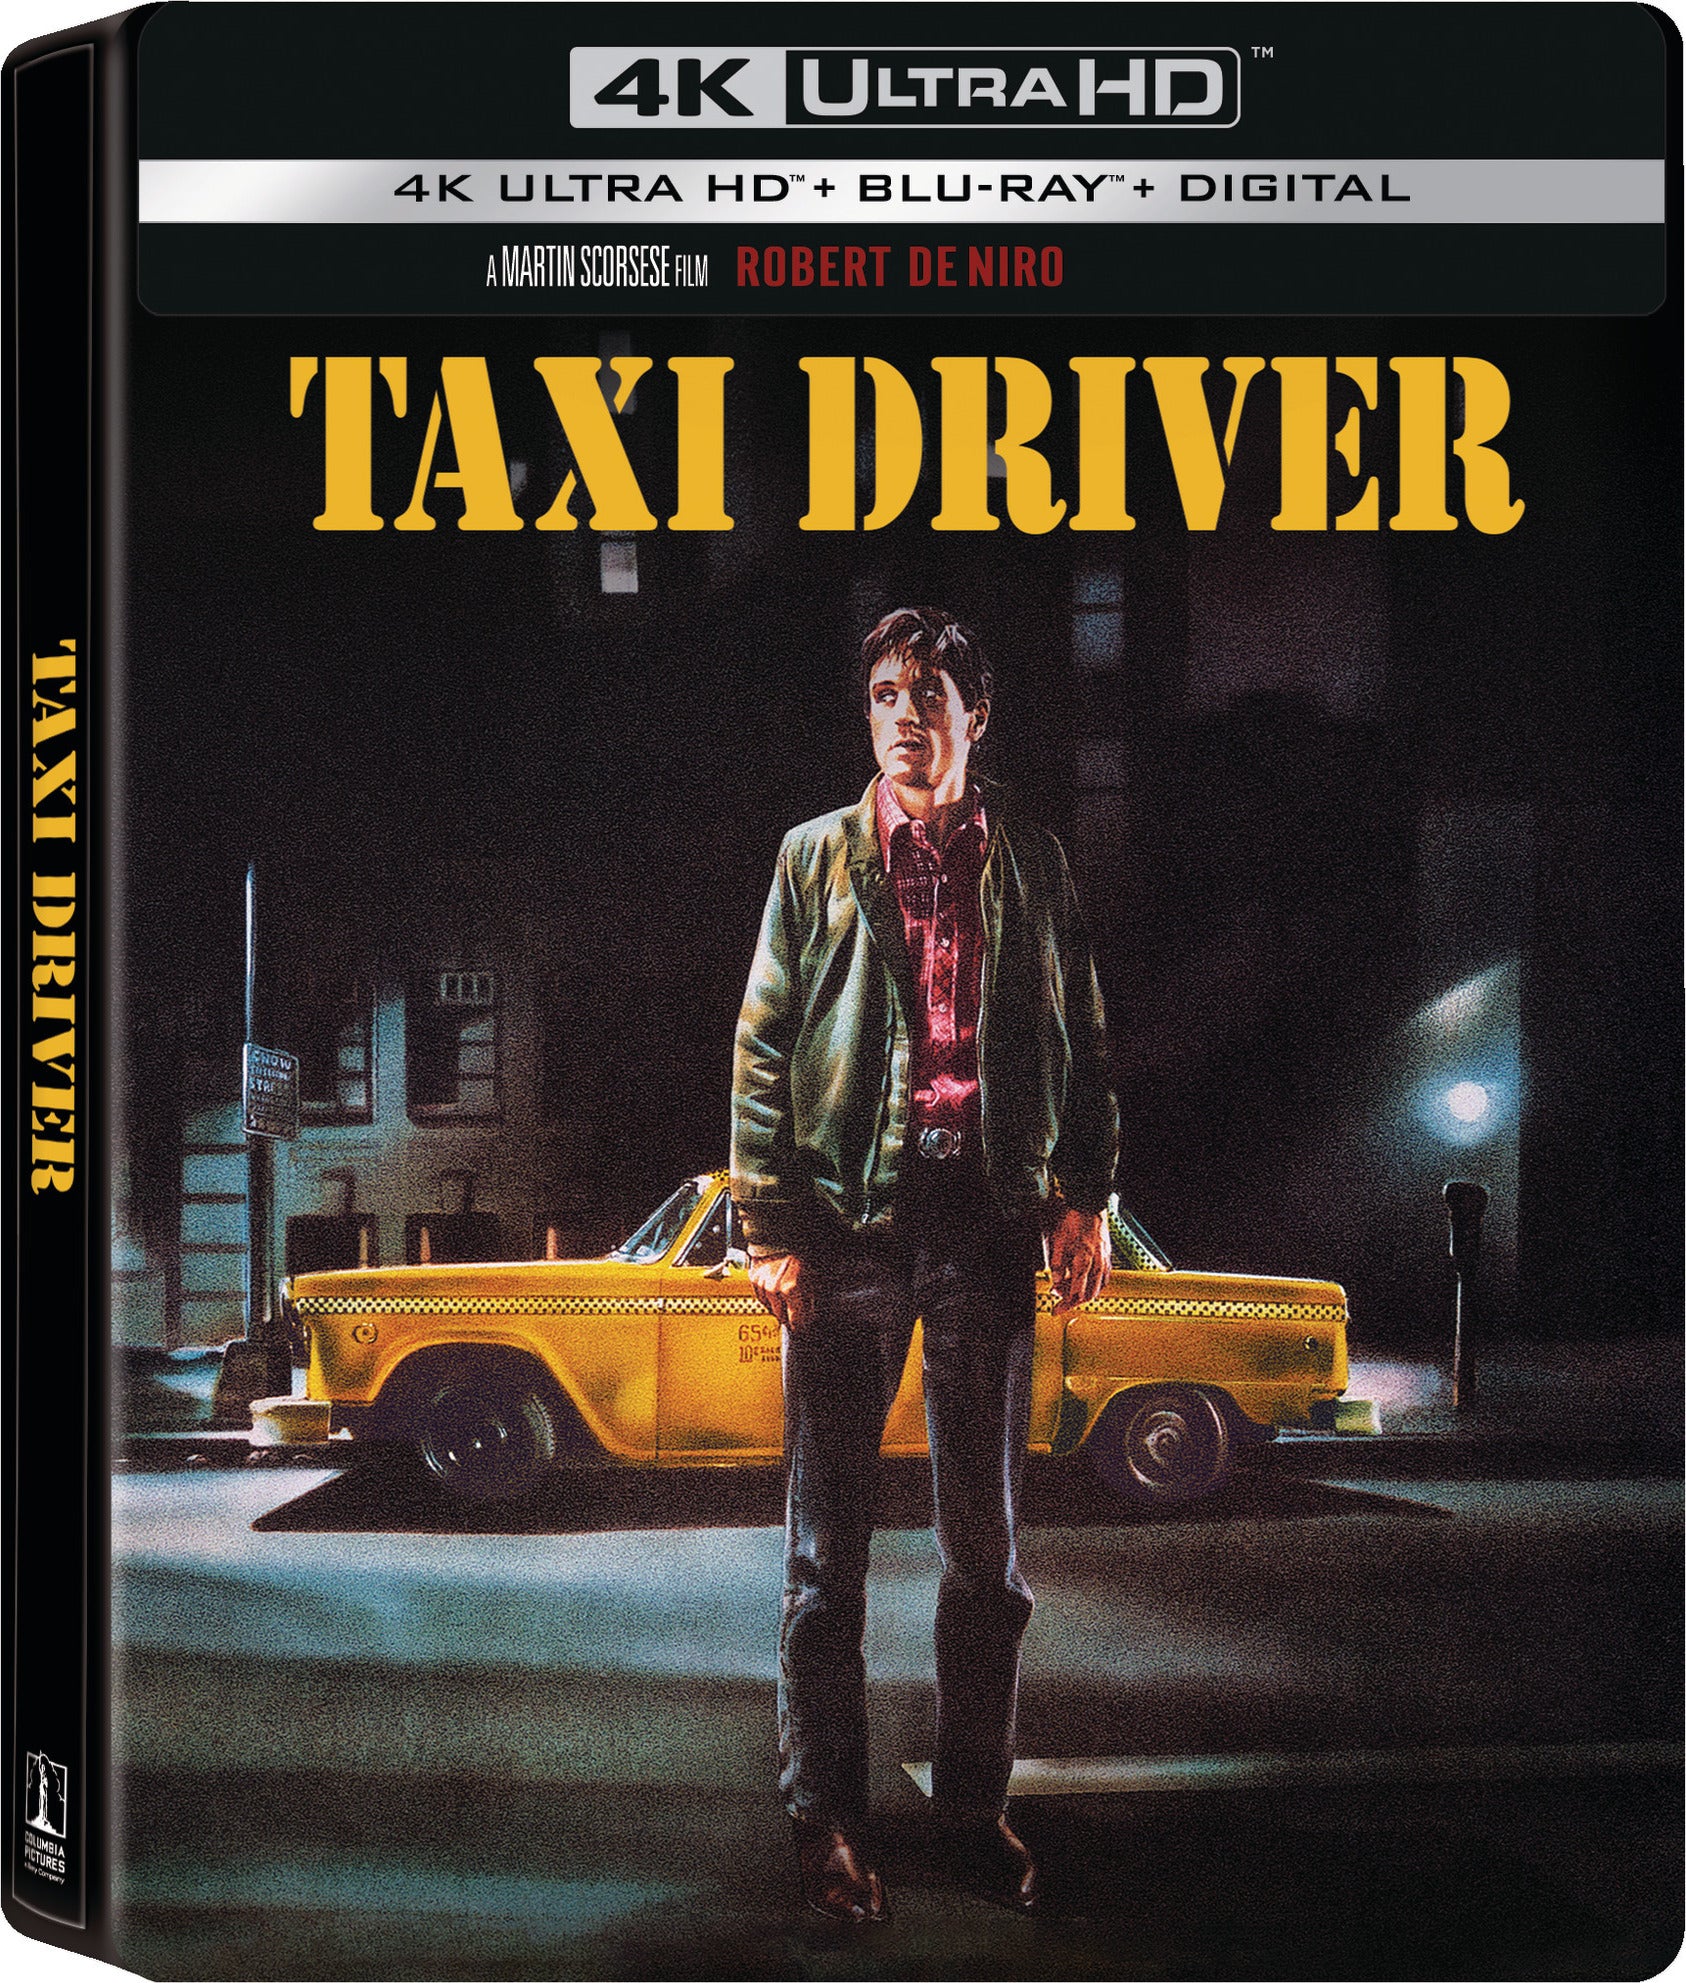 TAXI DRIVER (LIMITED EDITION) 4K UHD/BLU-RAY STEELBOOK [PRE-ORDER]